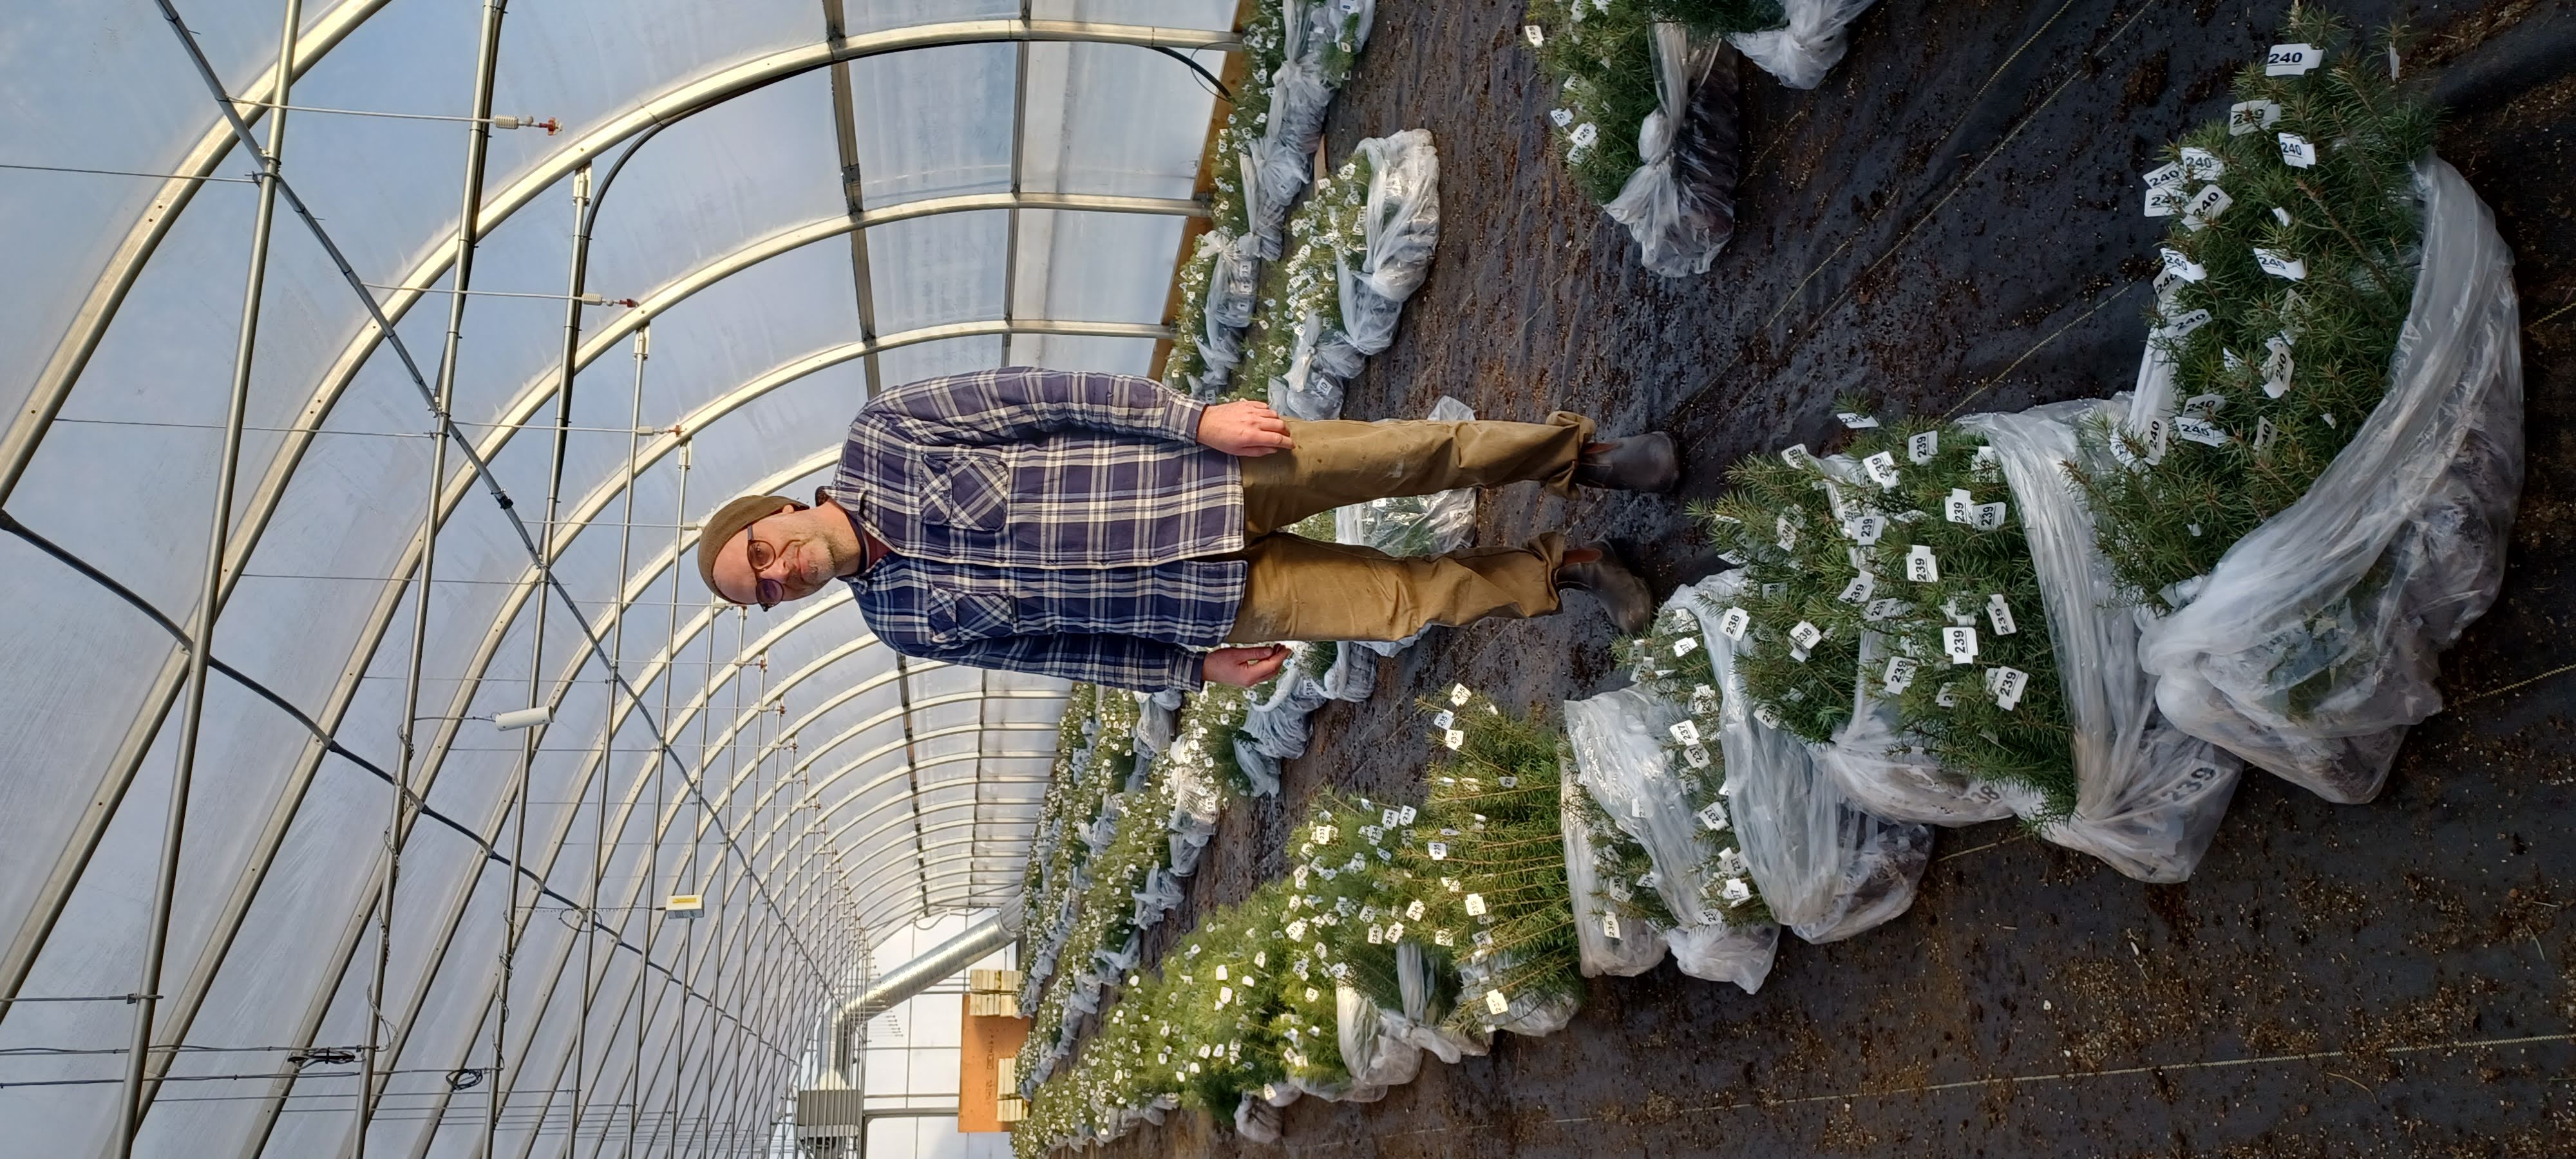 A researcher in a plaid shirt stands in a greenhouse surrounded by bags of seedlings.